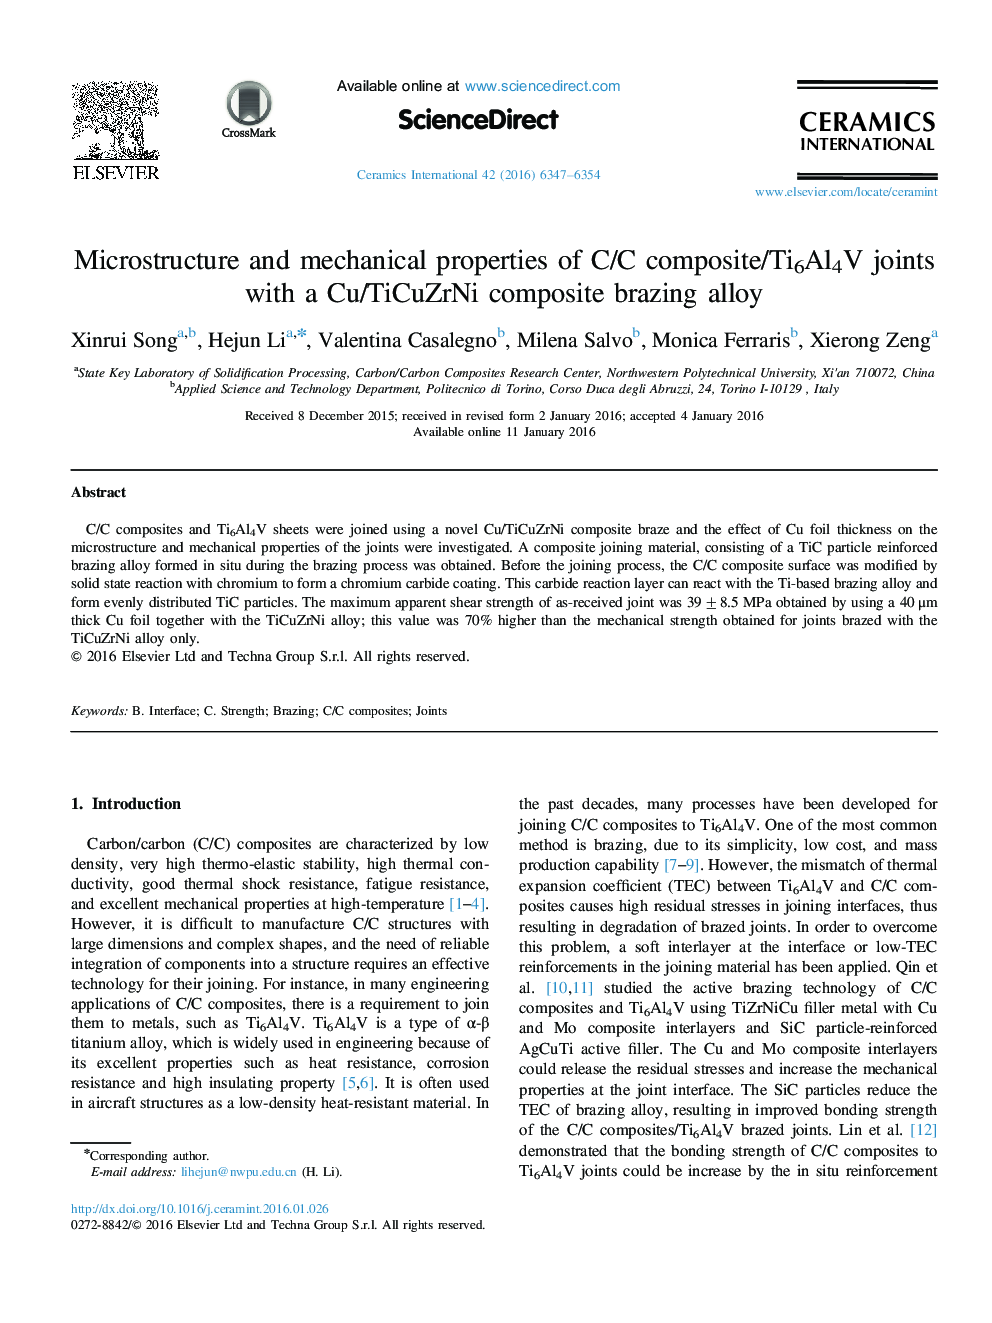 Microstructure and mechanical properties of C/C composite/Ti6Al4V joints with a Cu/TiCuZrNi composite brazing alloy